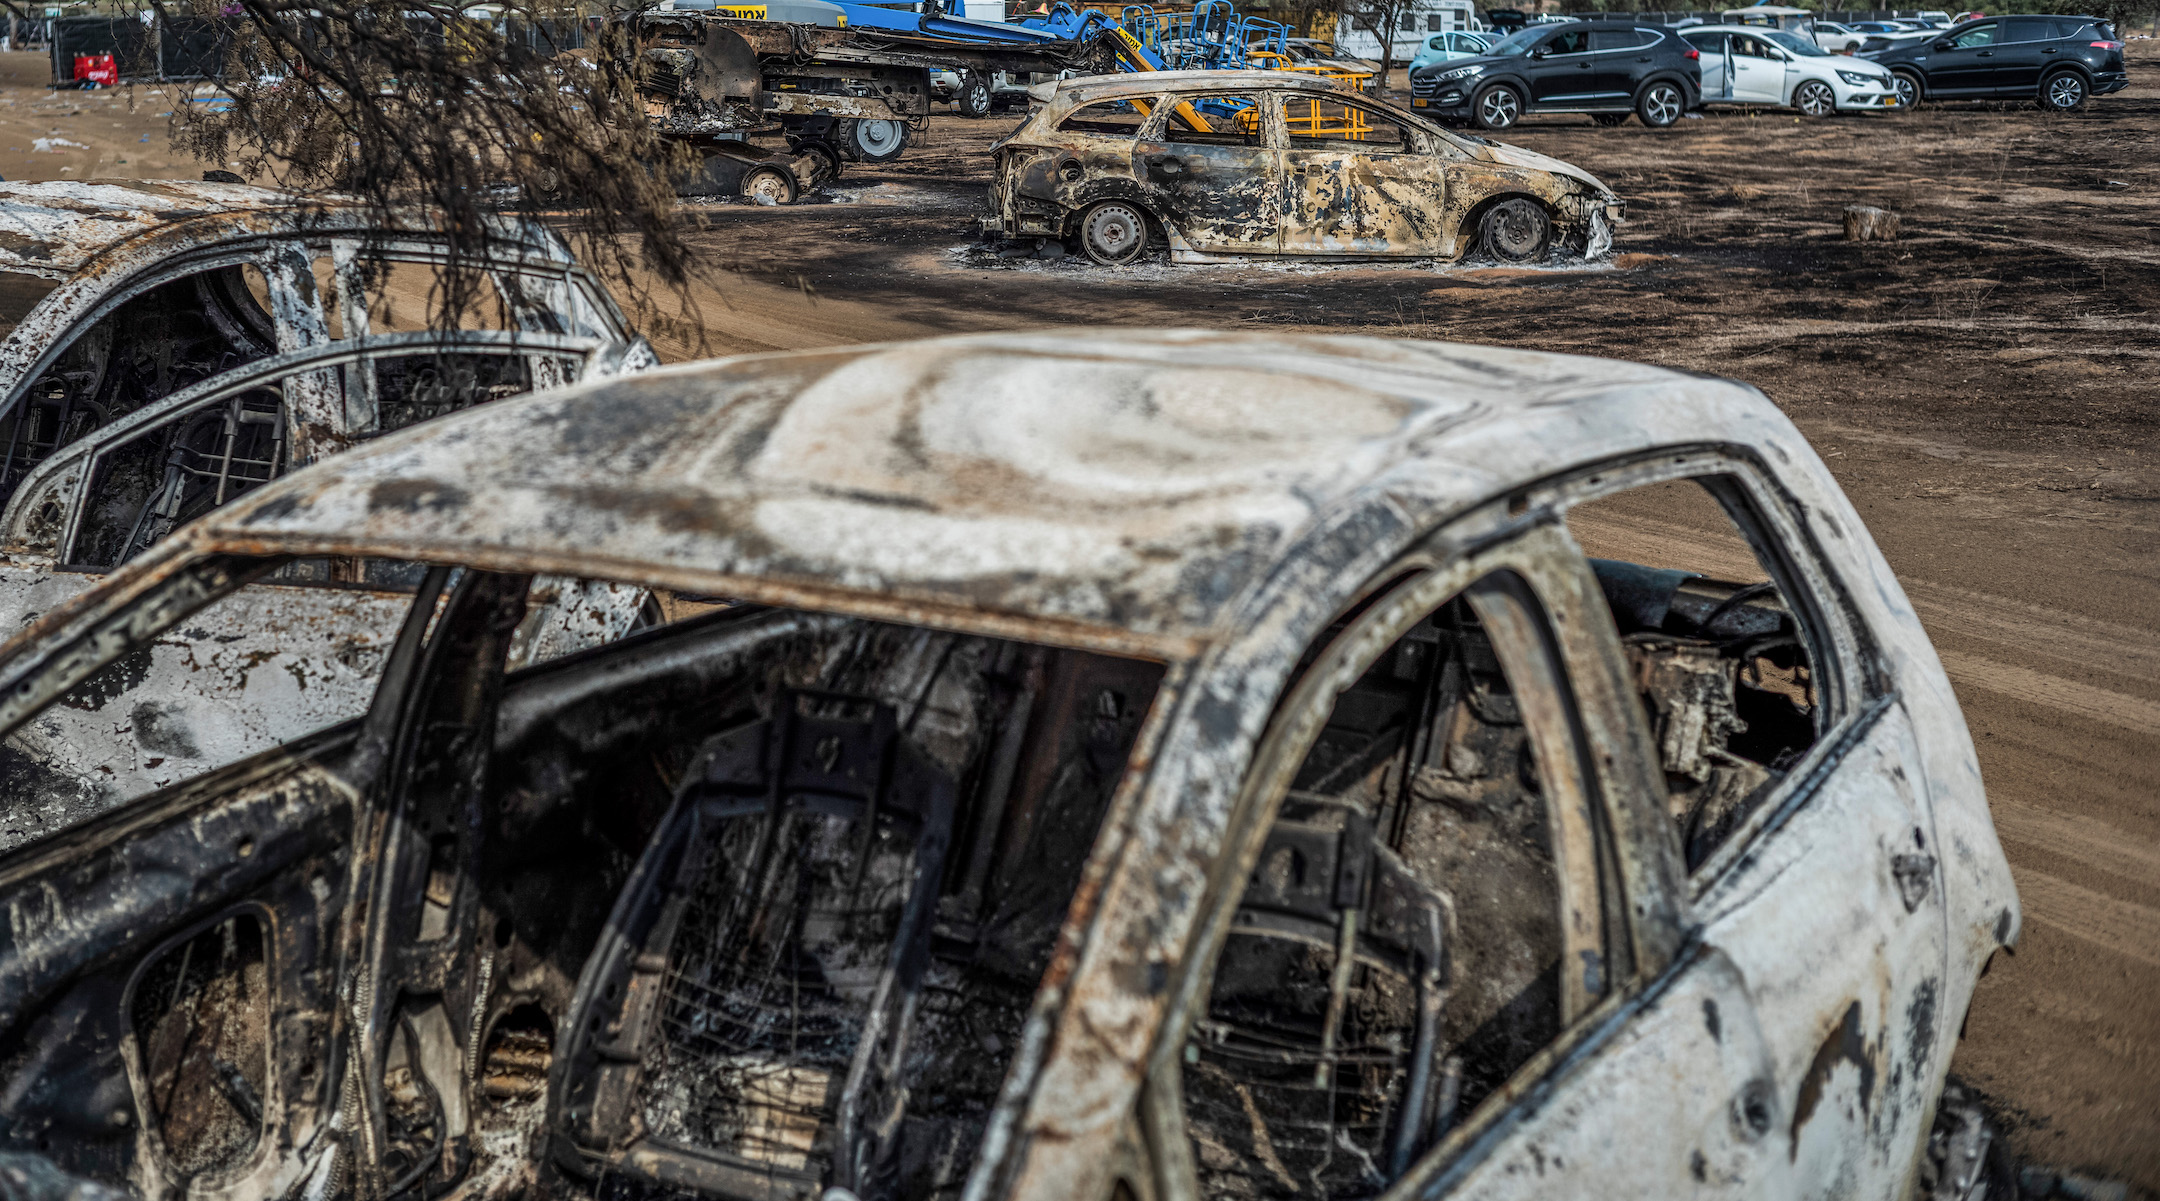 A view of destroyed vehicles near the grounds of the Tribe of Nova music festival after Saturday's deadly attack by Hamas (Ilia Yefimovich/picture alliance via Getty Images)